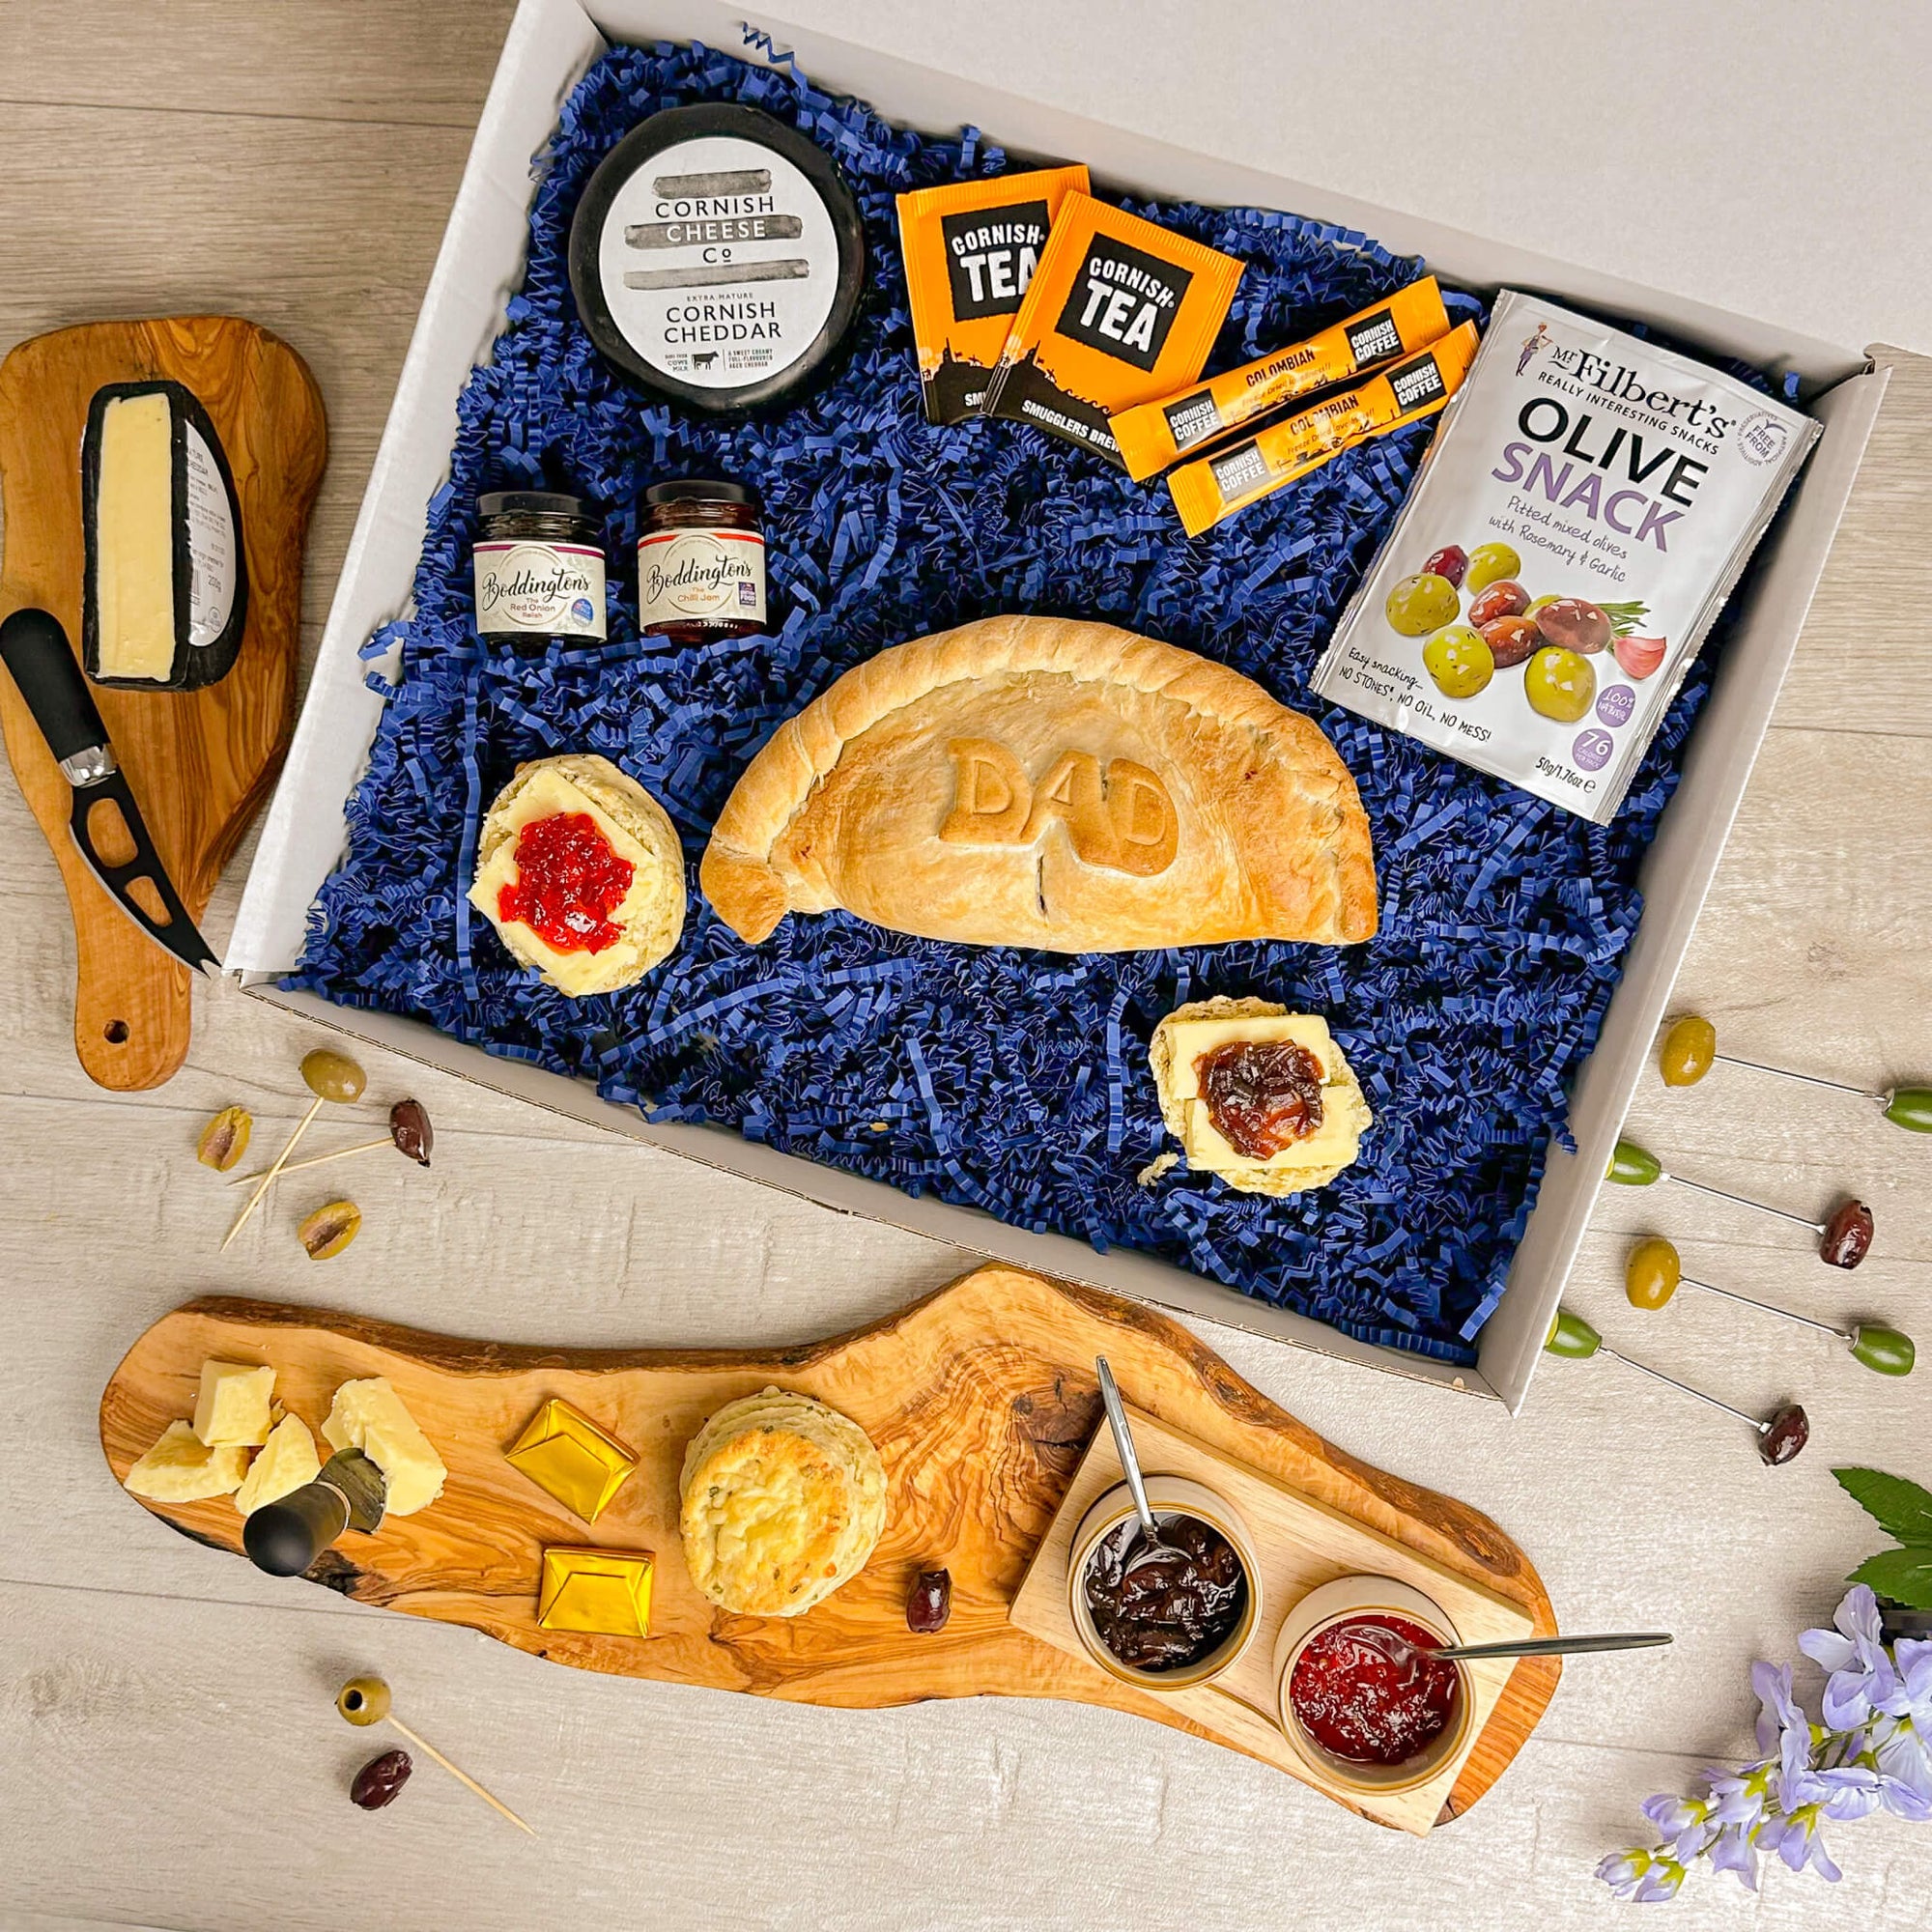 Dad's Pasty & Cheese Box